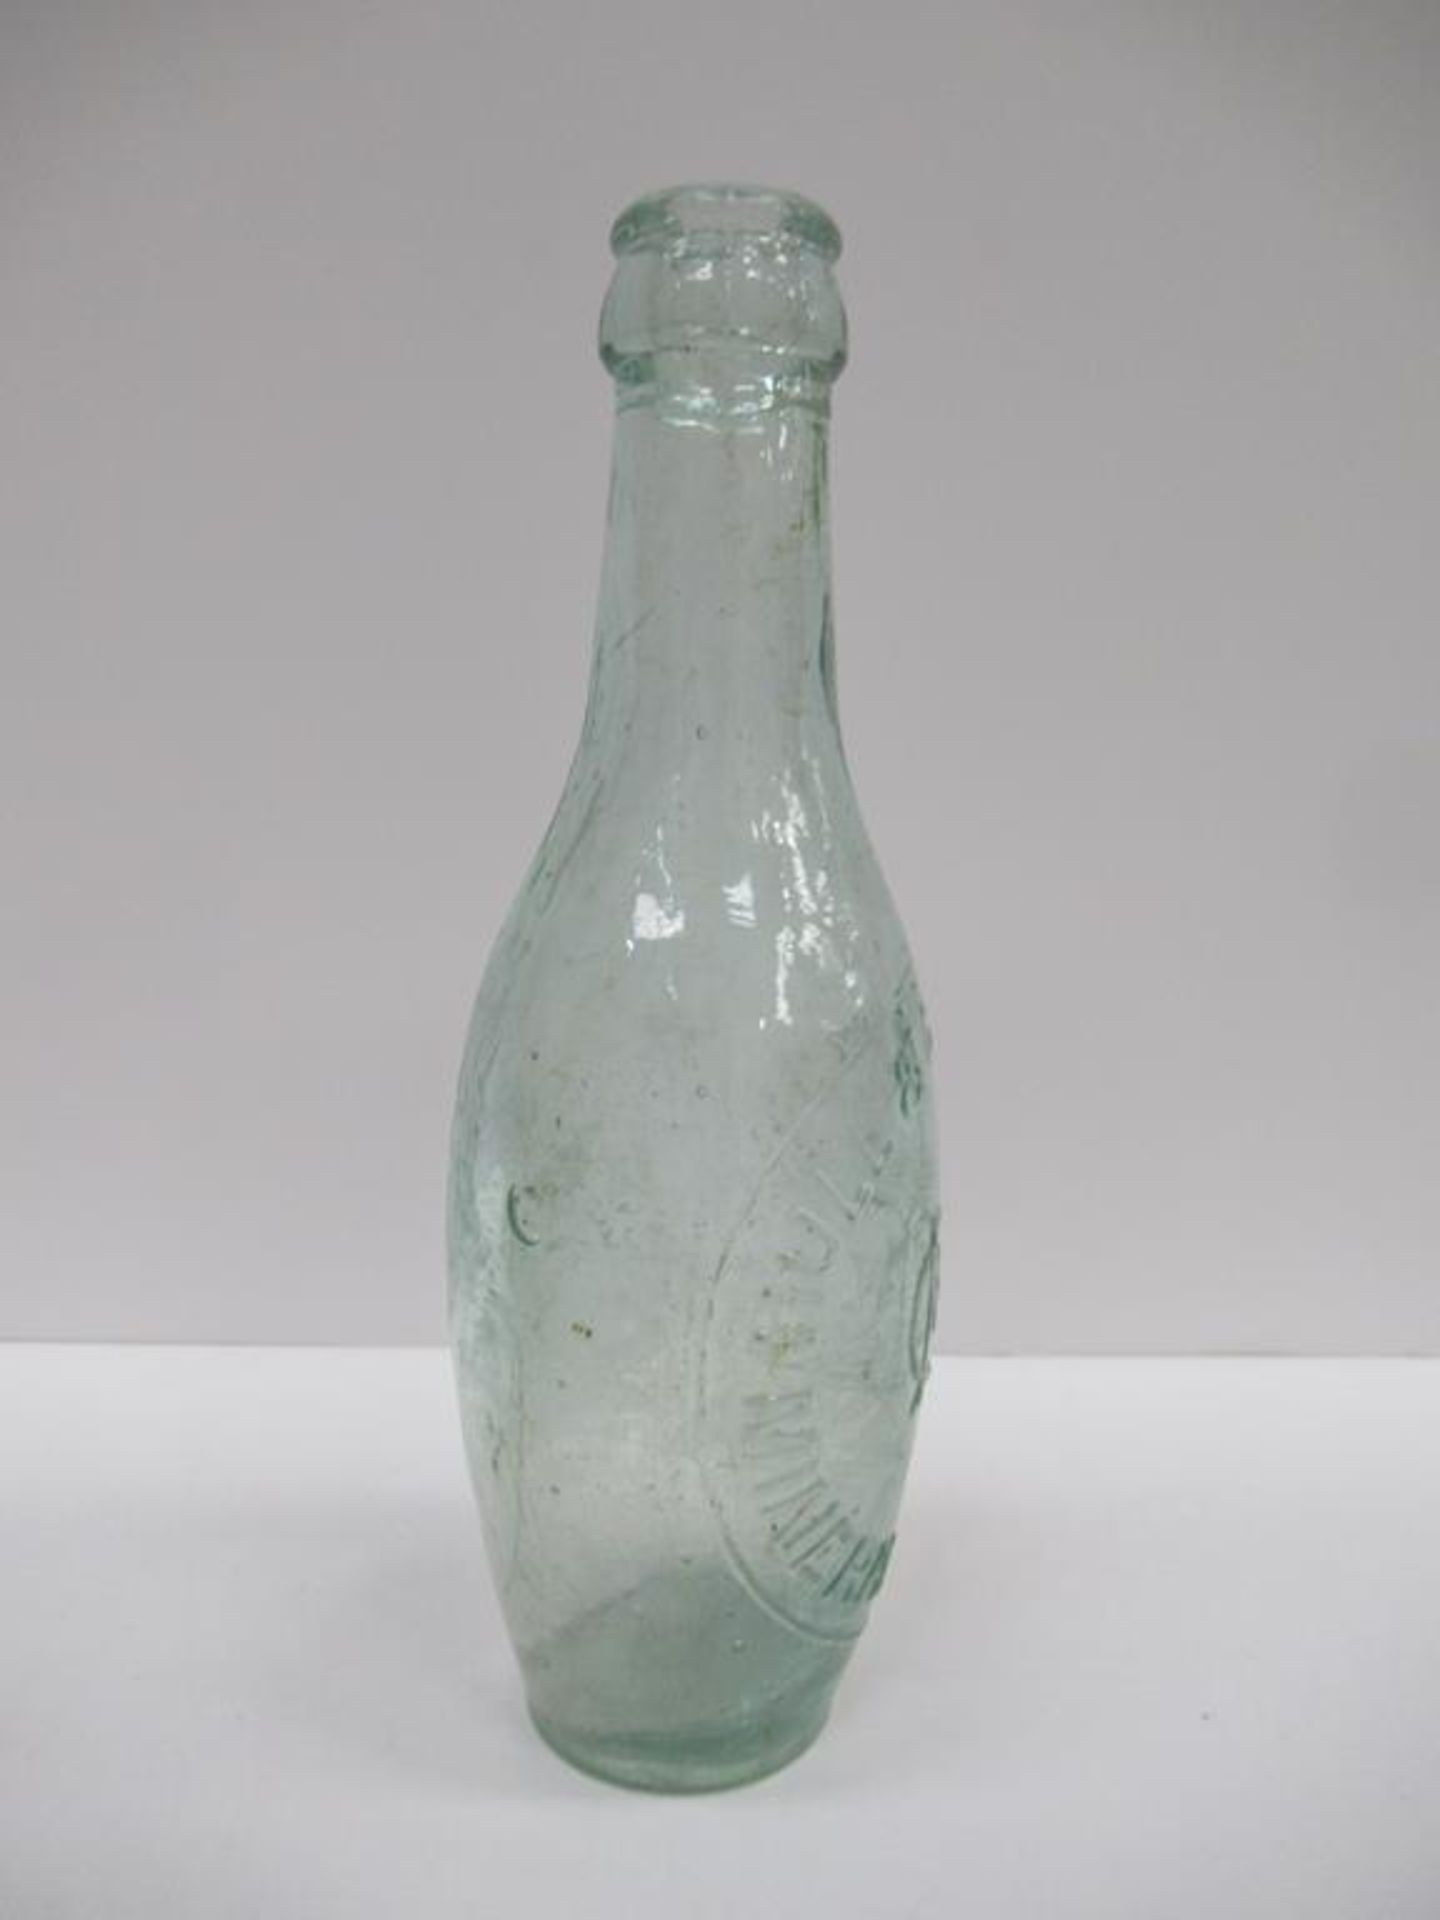 Hull and Grimsby Mineral Water Co. bottle - Image 2 of 6